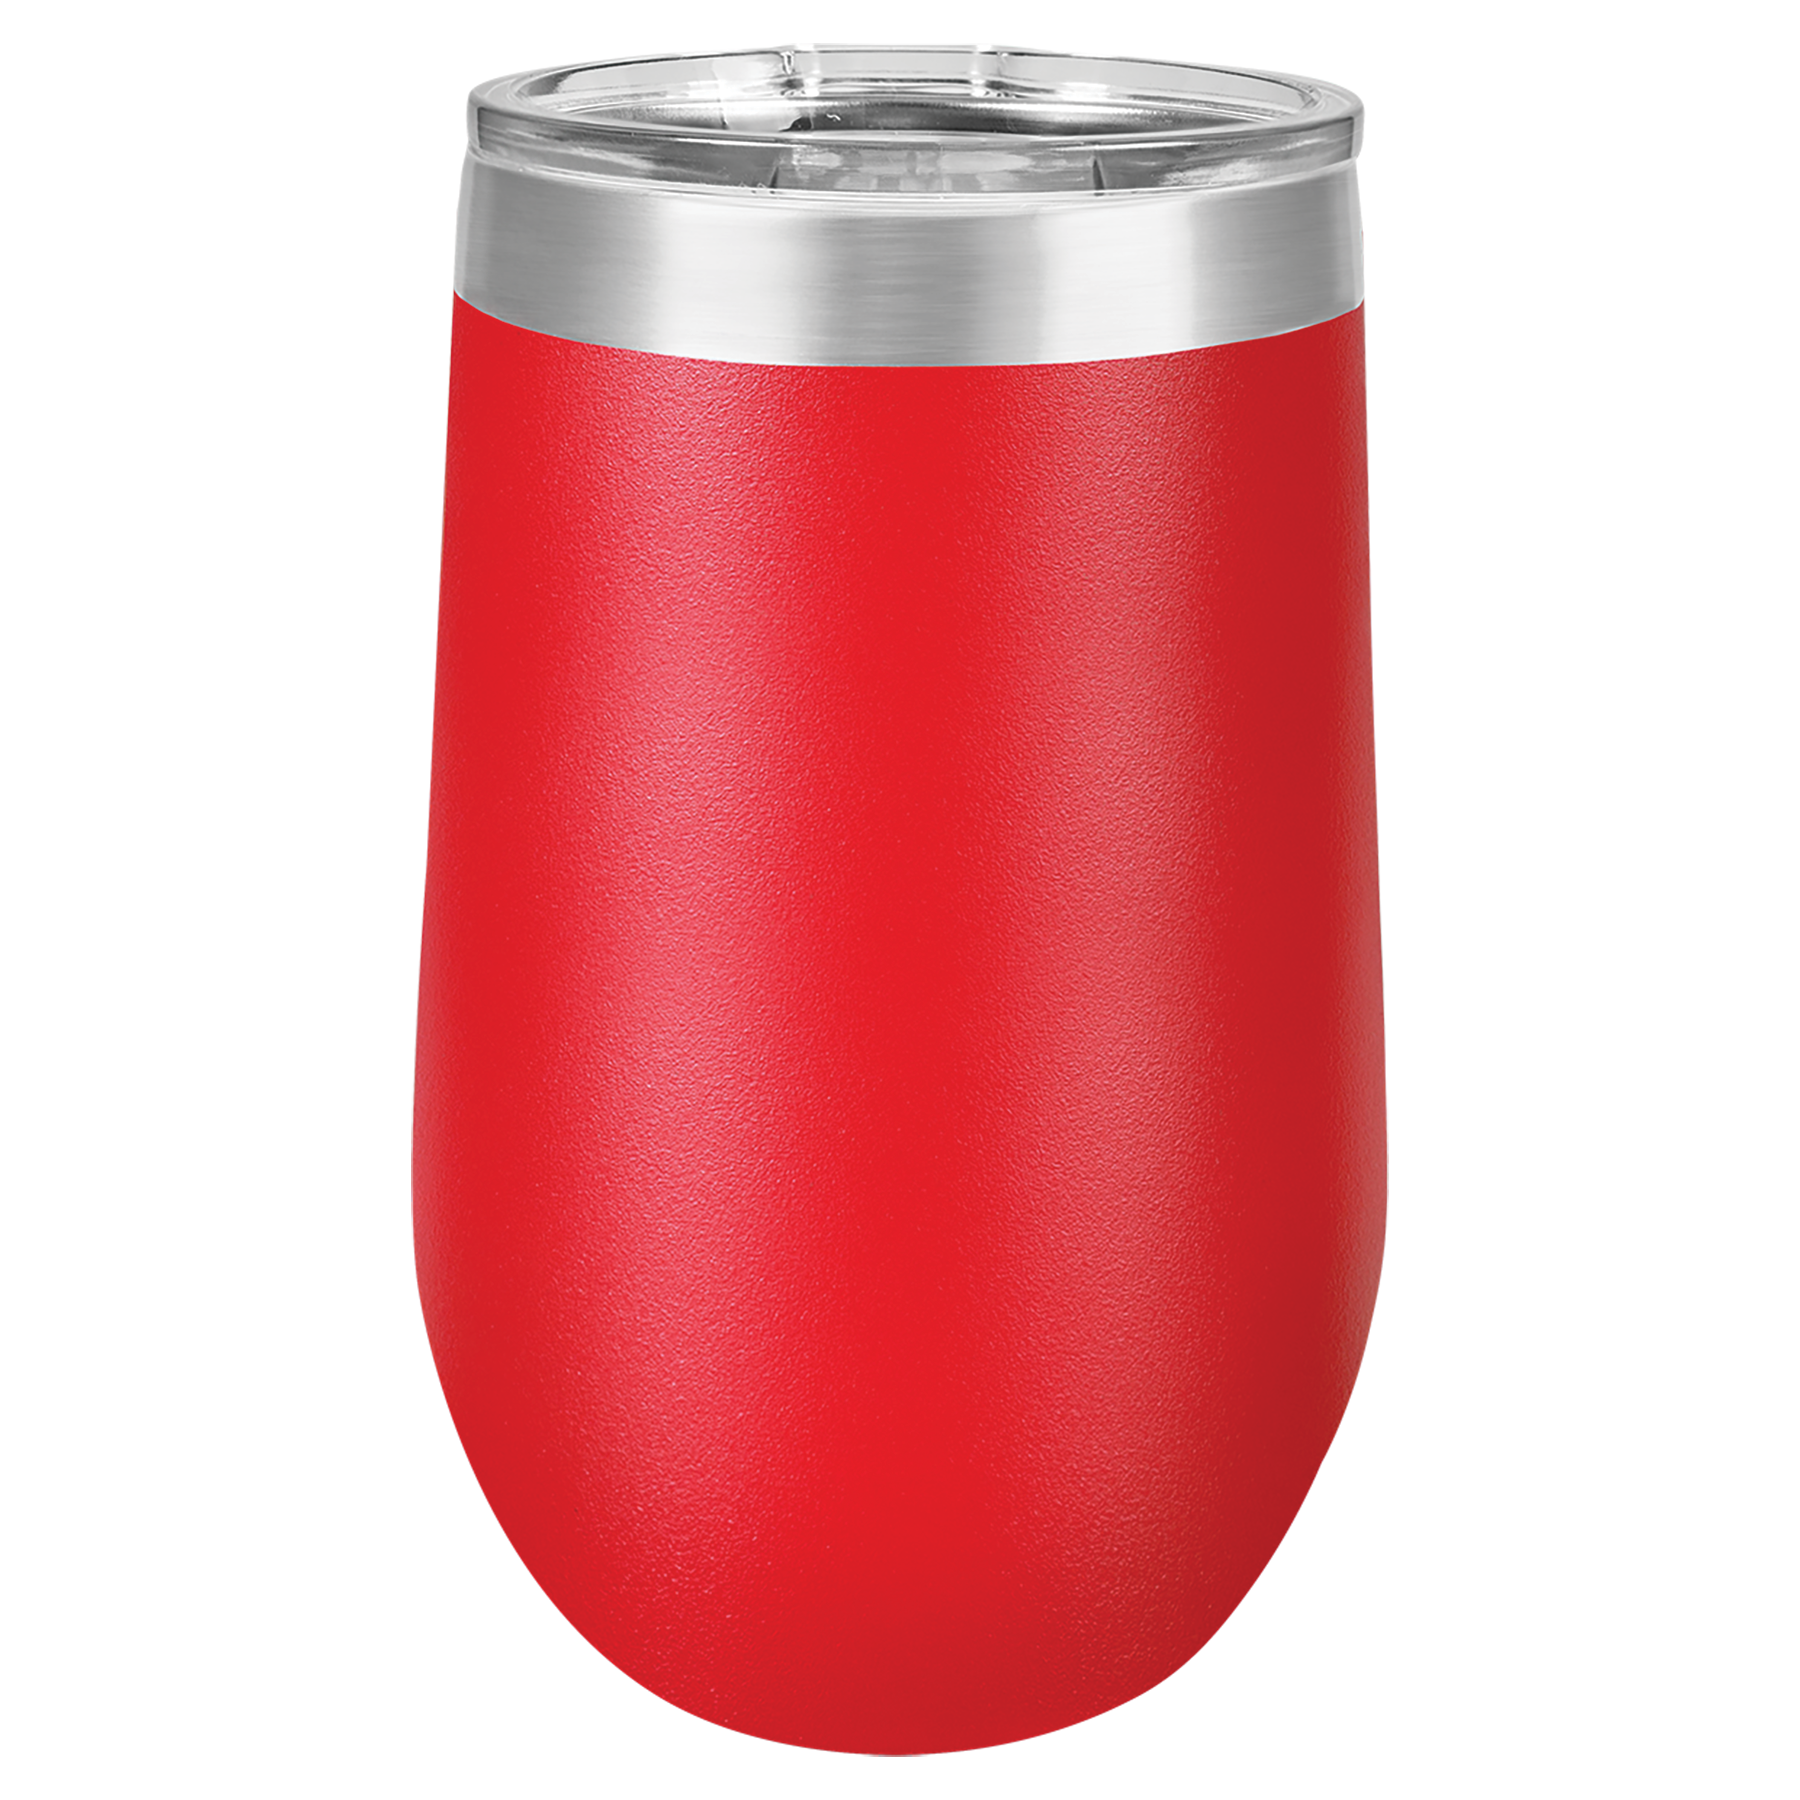 Red 16oz Stemless Wine Tumbler -One Free Engraving  -Double-wall Vacuum Insulated  -Made from 18/8 Gauge Stainless Steel (Type 304 Food Grade)  -Lid is BPA Free (Hand Wash Only)  -Not recommended for Dishwasher  -Works with Cold and Hot Drinks  -17 Color Options  -Perfect for Personalized Gifts, Awards, Incentives, Swag & Fundraisers